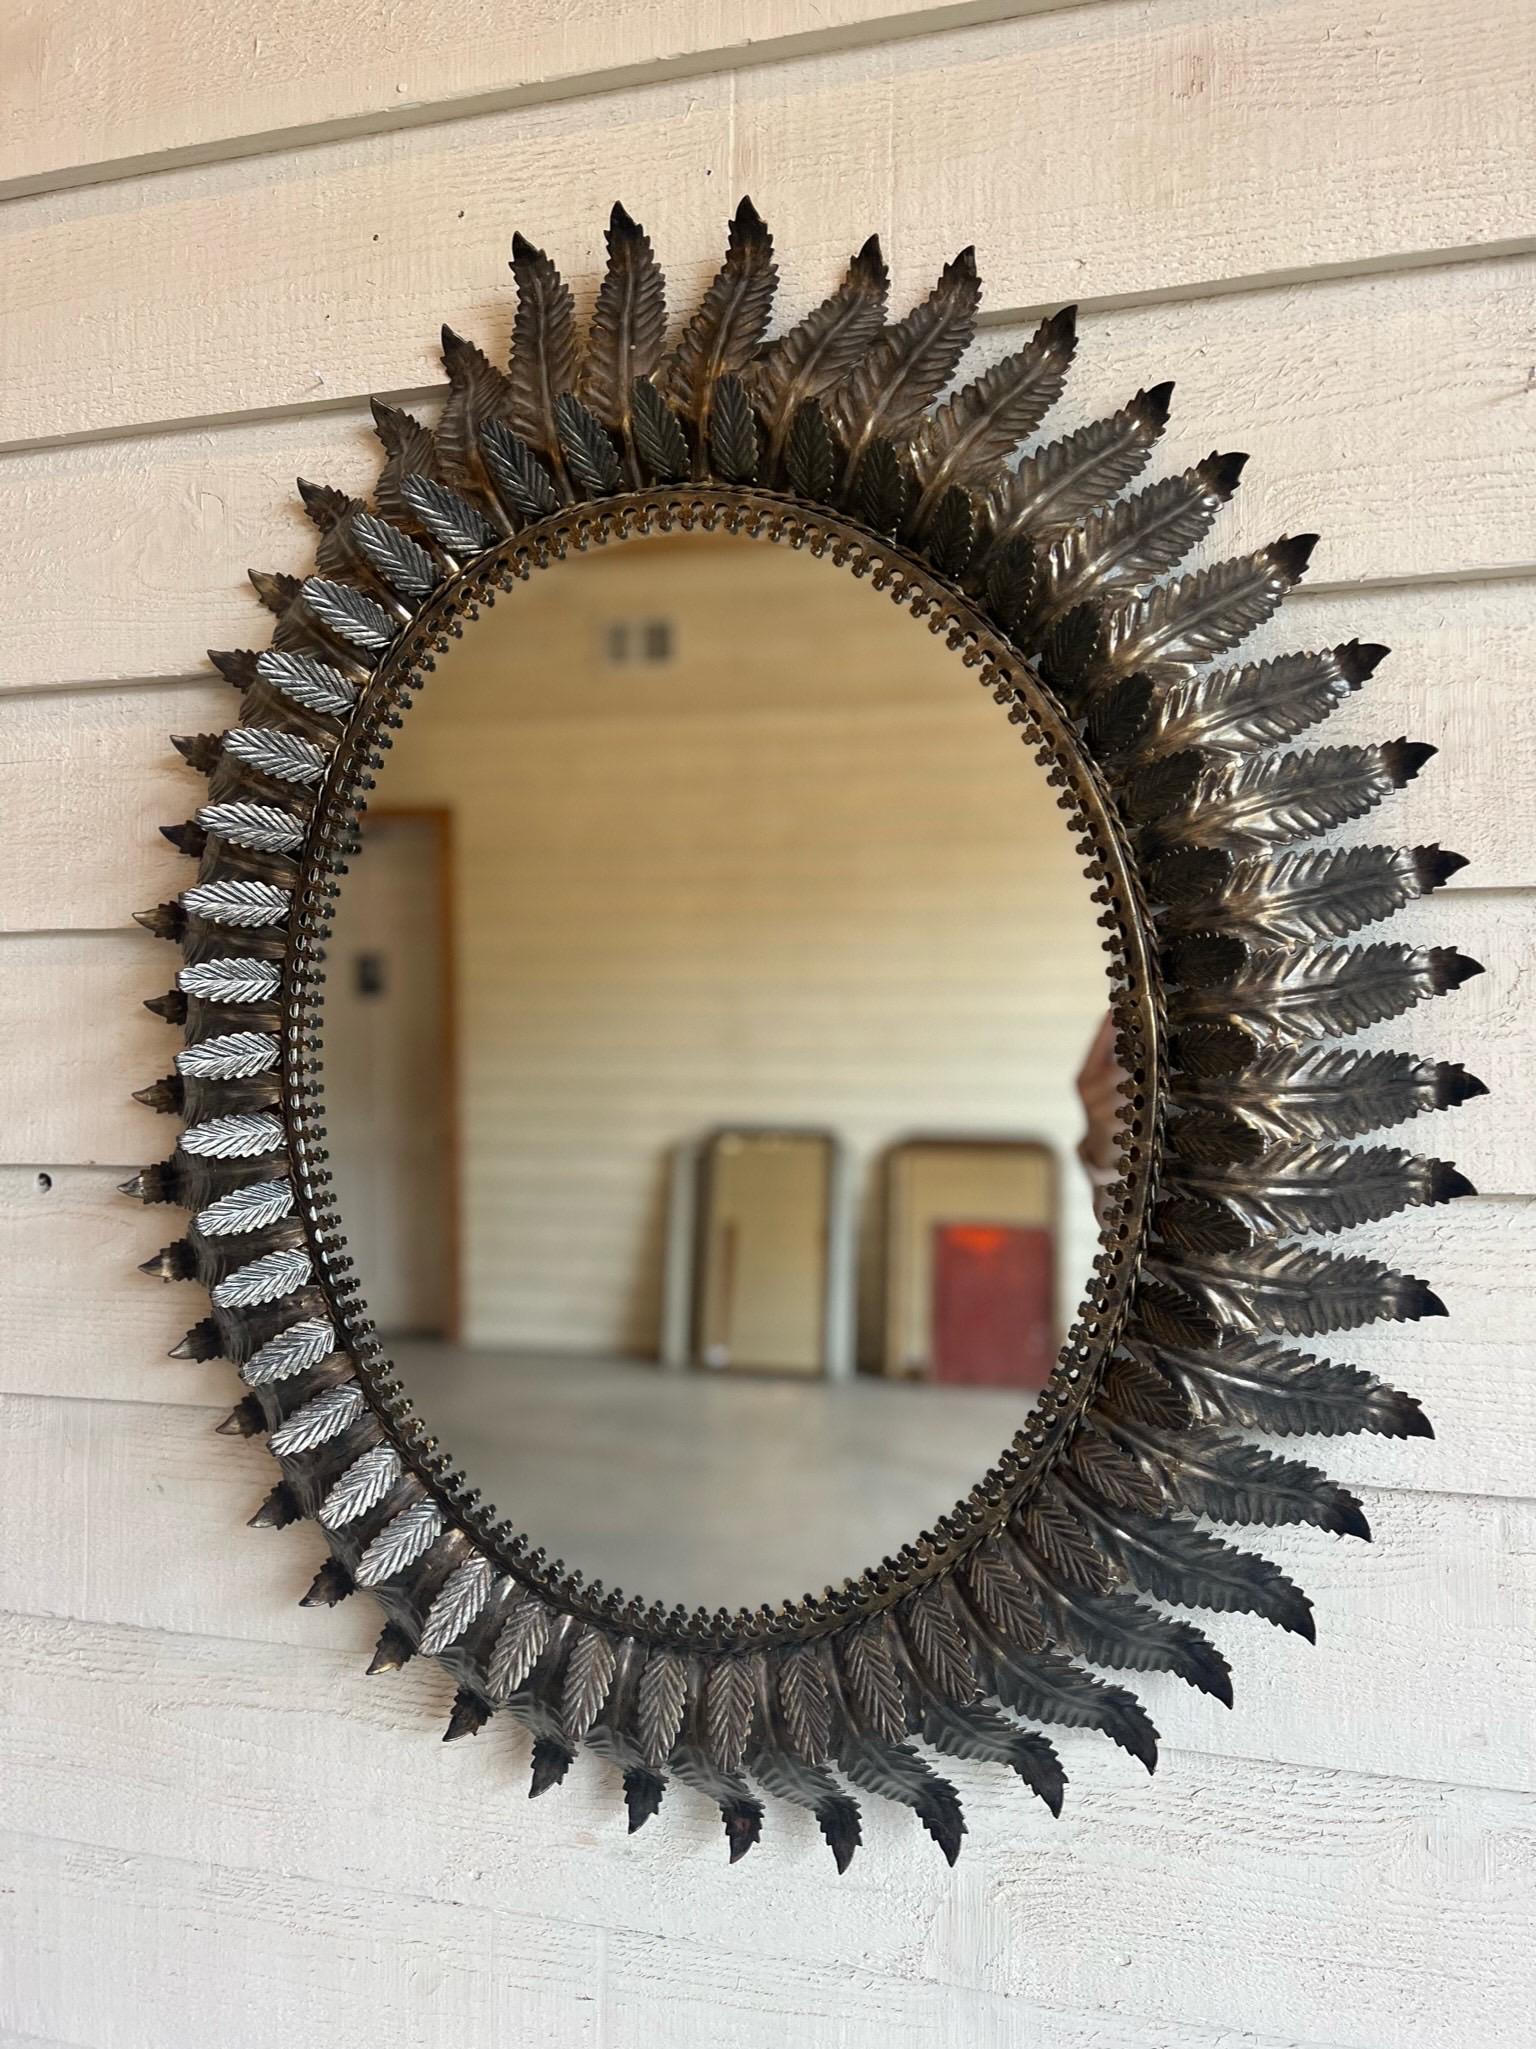 Hand-Crafted Vintage Spanish Mirror with Metal Leaf Detail